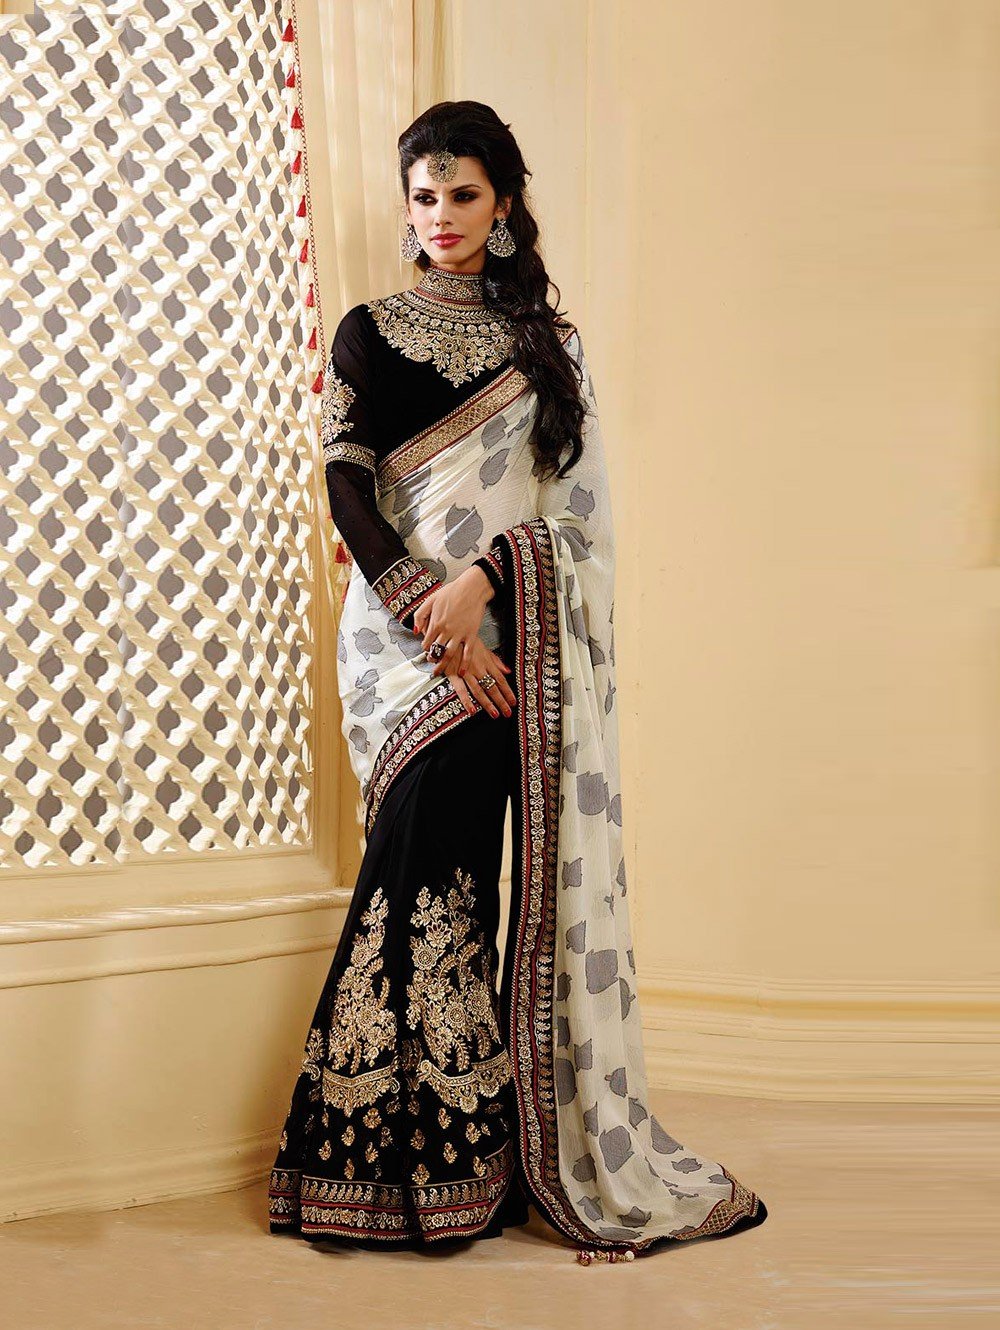 How to make a style statement with Indian Attire